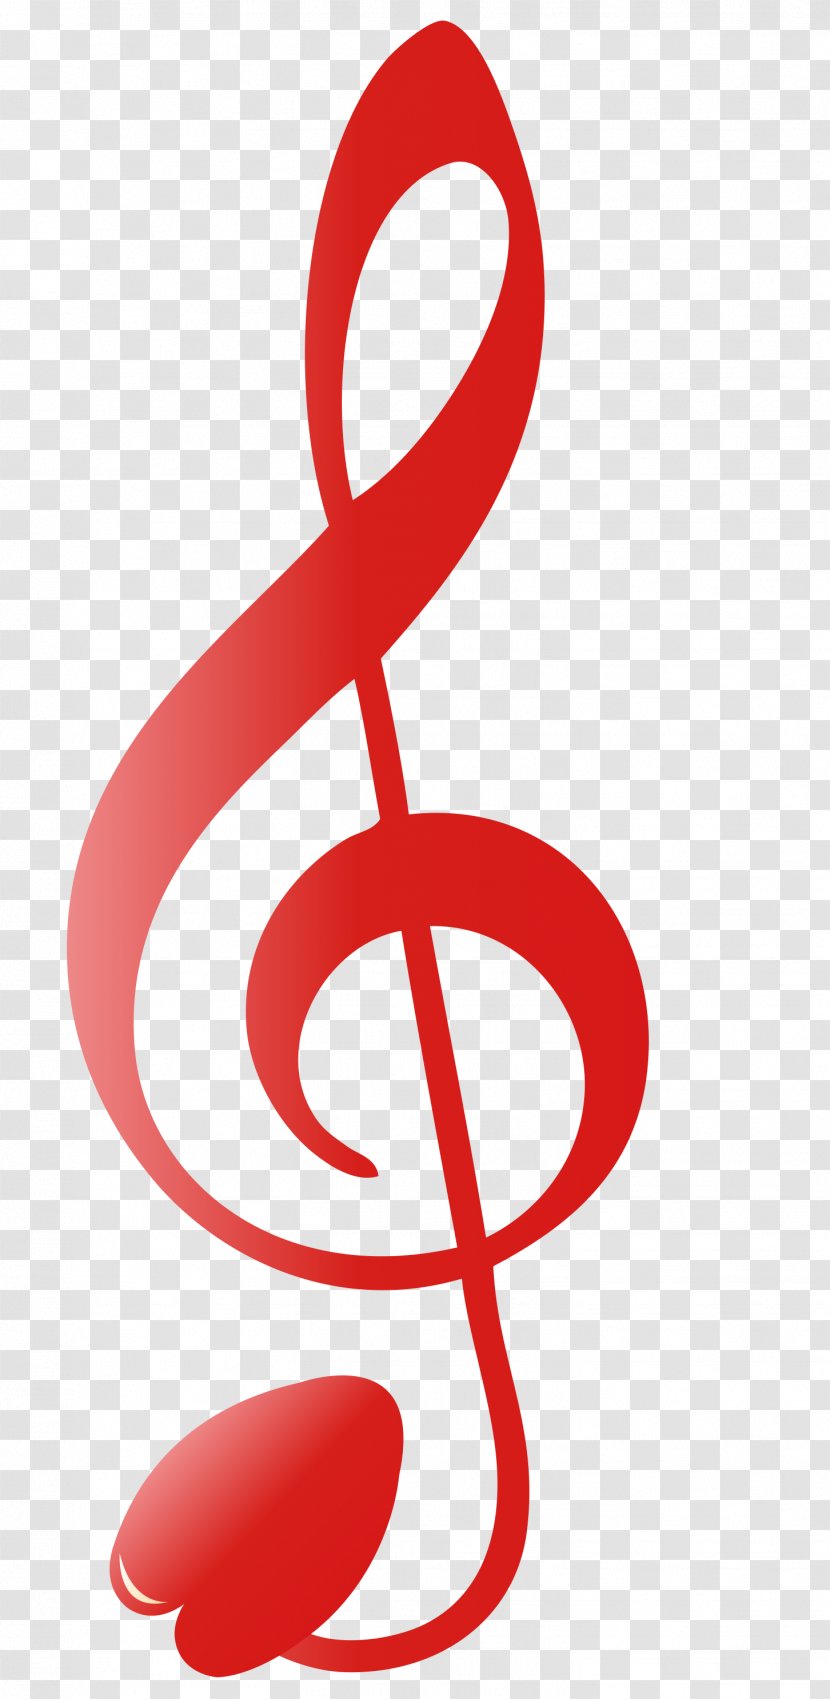 Clef Musical Note Treble Sol Anahtaru0131 - Tree - Red Transparent PNG